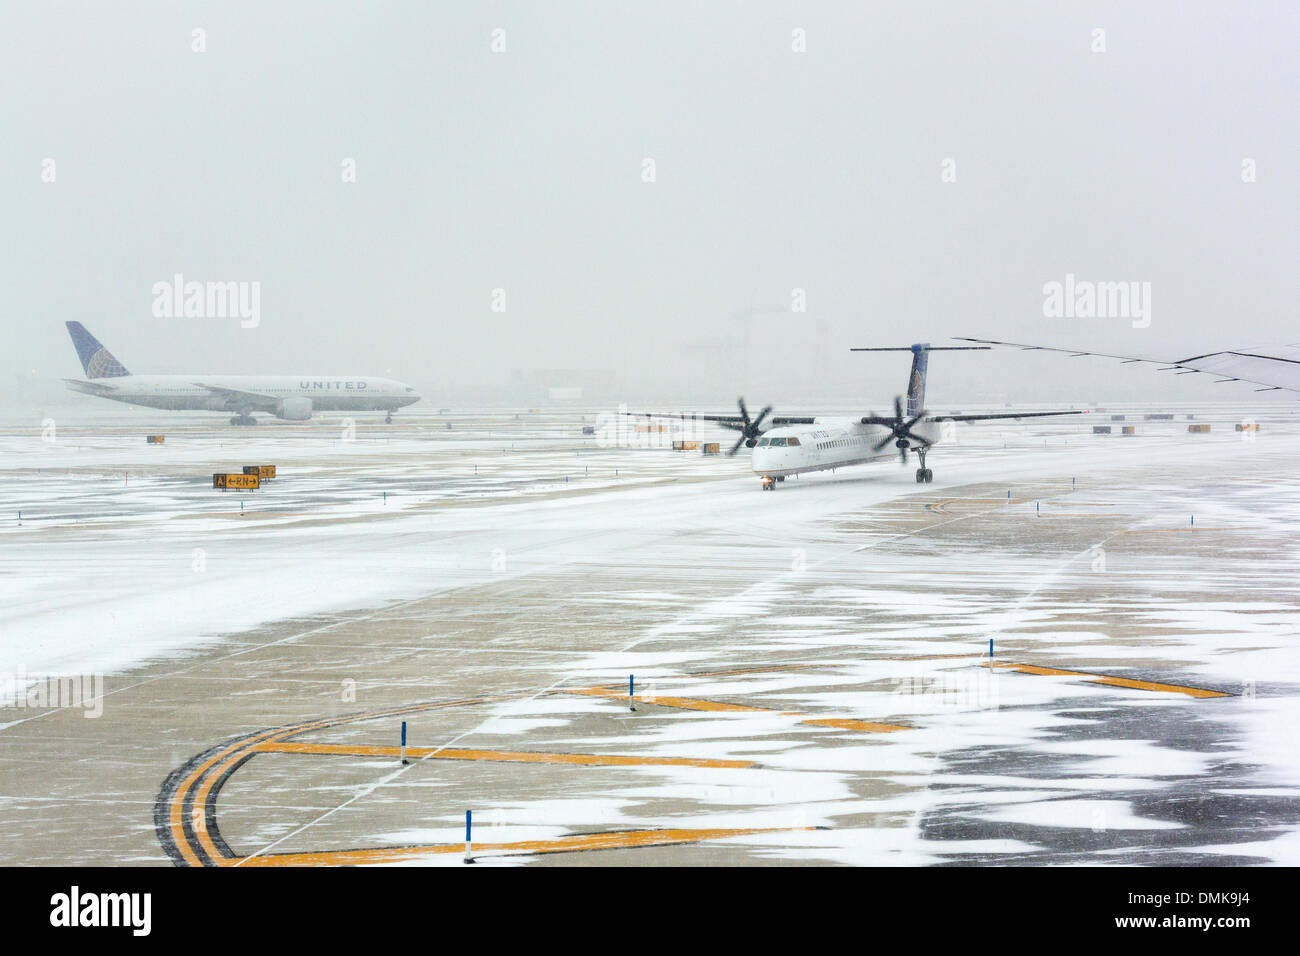 Newark Airport, NJ, USA. Snow covered runway at the Newark Liberty International Airport (EWR), New Jersey, USA during winter snow storm Electra moving in over the Northeast region. Poor visiblity causing travel delays. Credit:  Gregory Gard/Alamy Live News Stock Photo